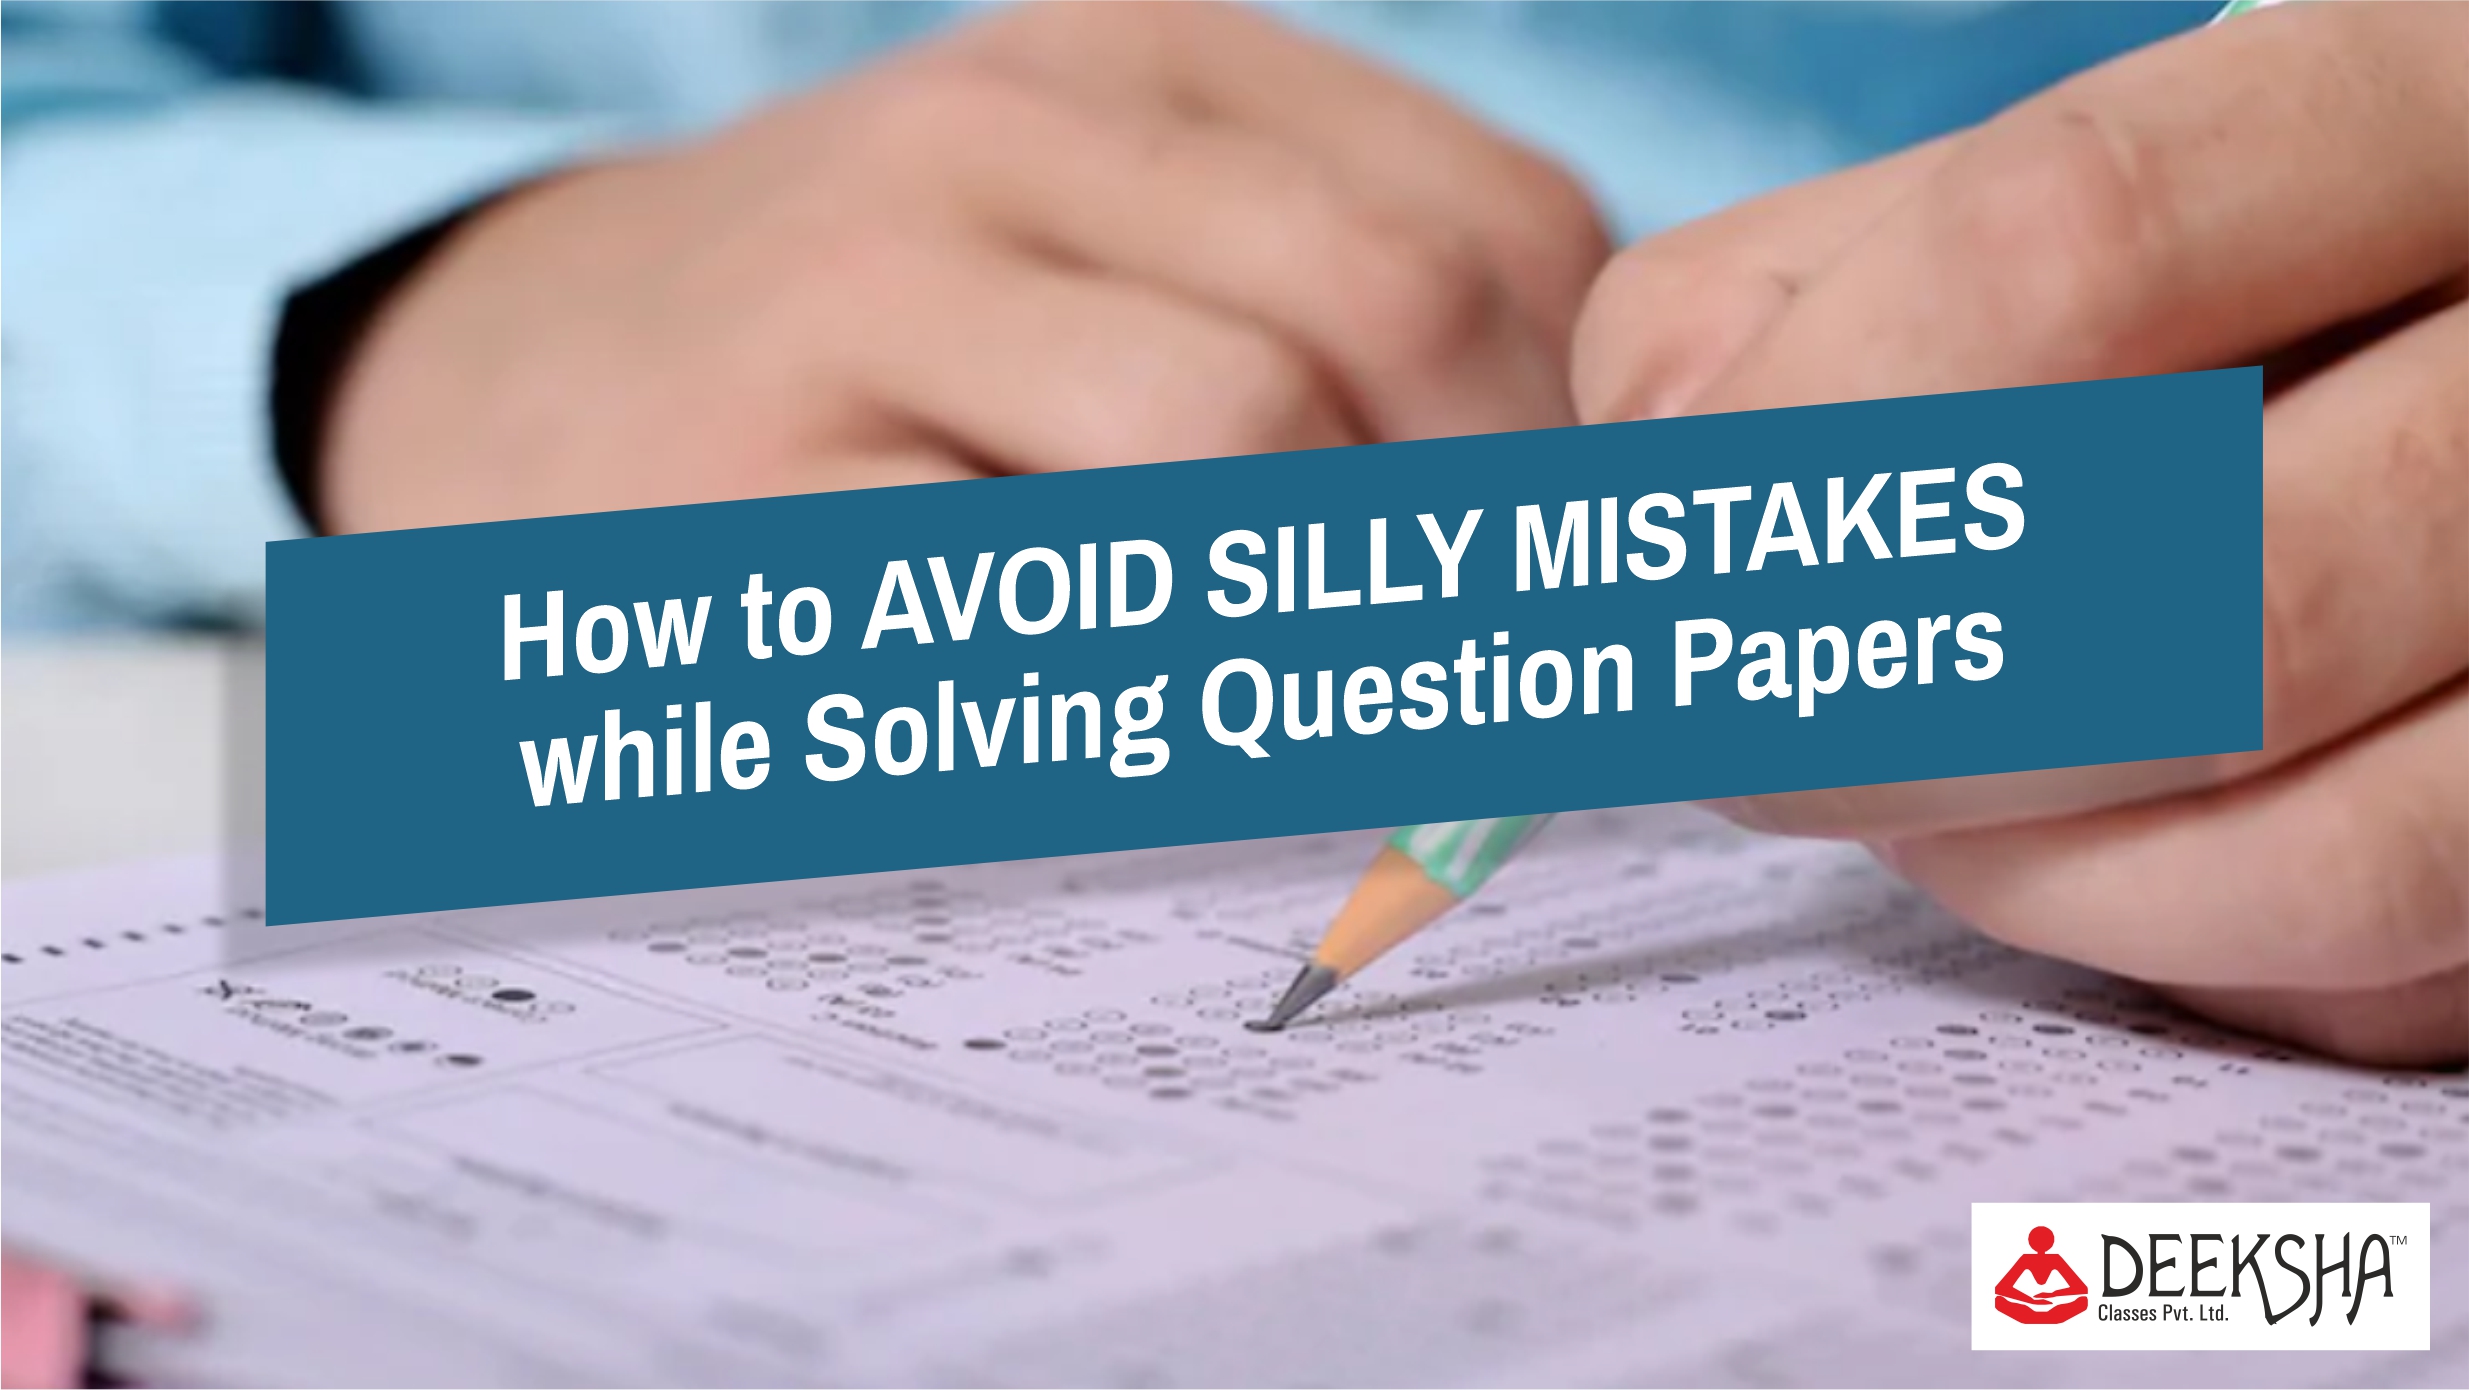 How to avoid silly mistakes while solving question papers